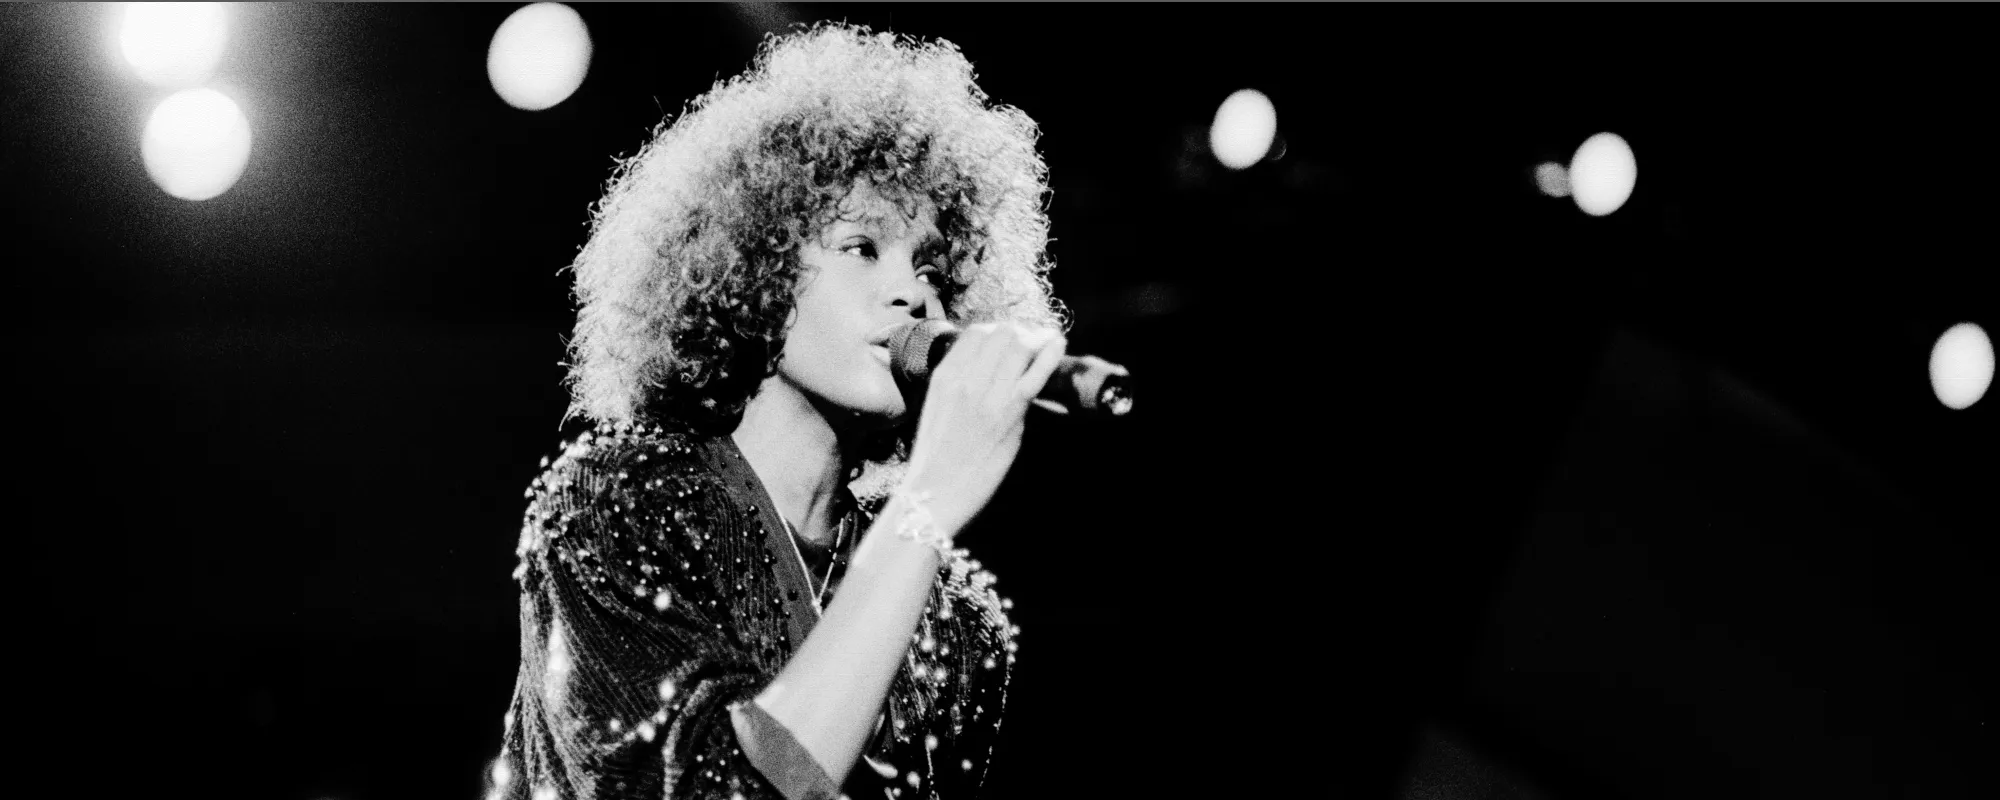 Behind the Meaning of “Greatest Love of All” by Whitney Houston